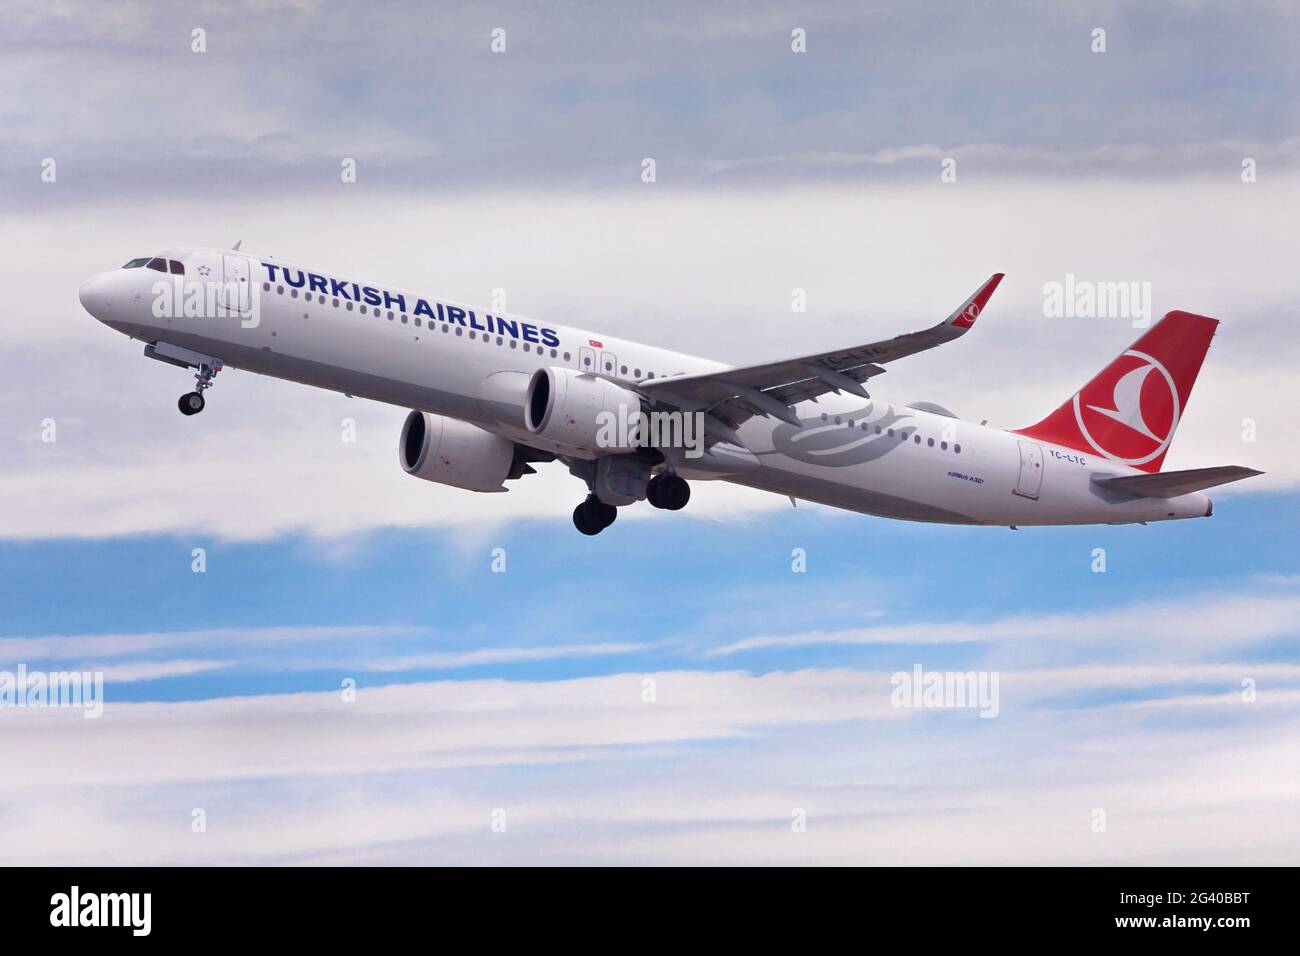 Barcelona, Spain - May 16, 2021: Turkish Airlines Airbus A321neo taking off from El Prat Airport in Barcelona, Spain. Stock Photo